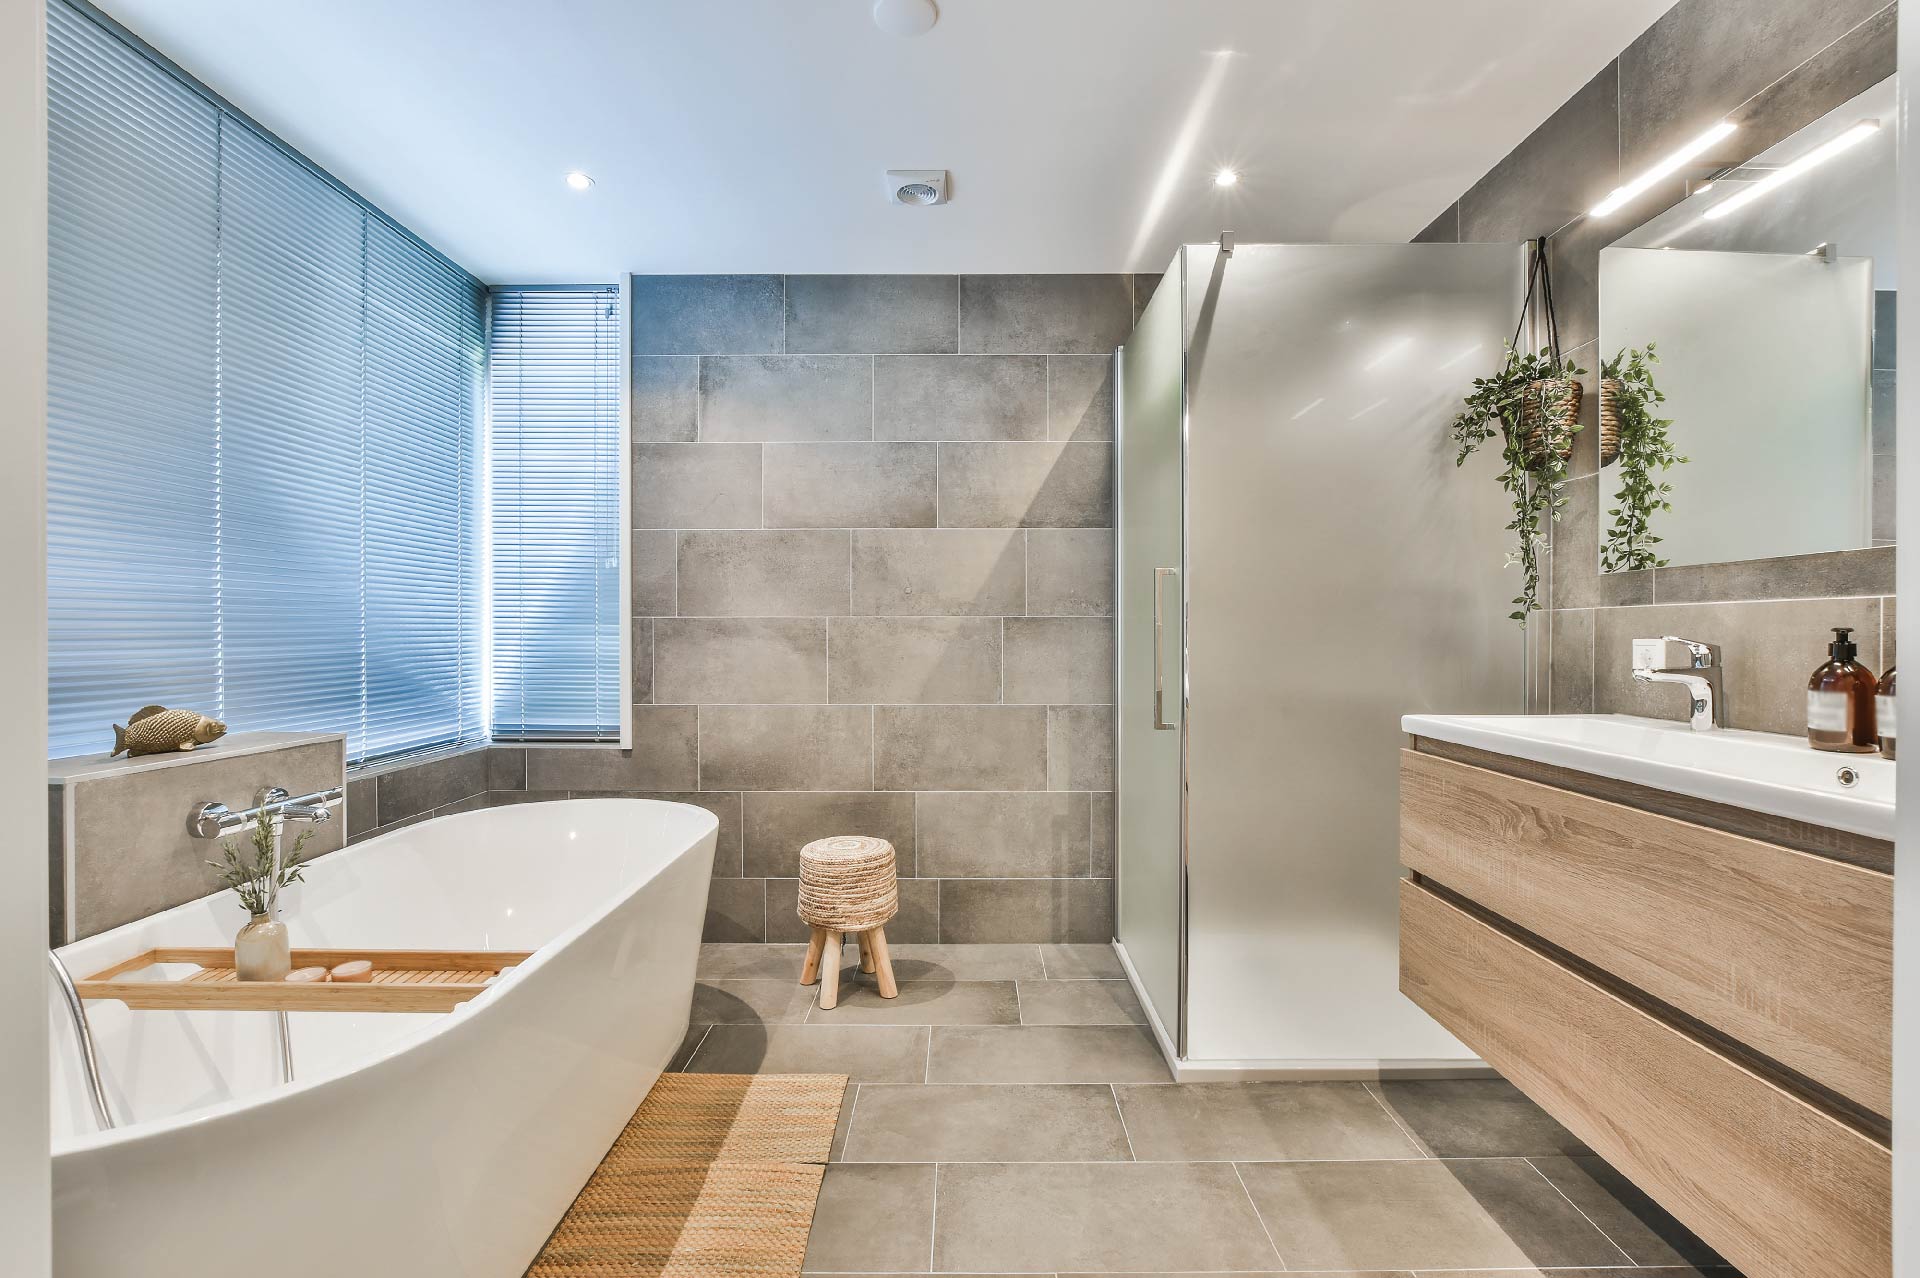 Things to Consider while Remodeling Your Bathroom